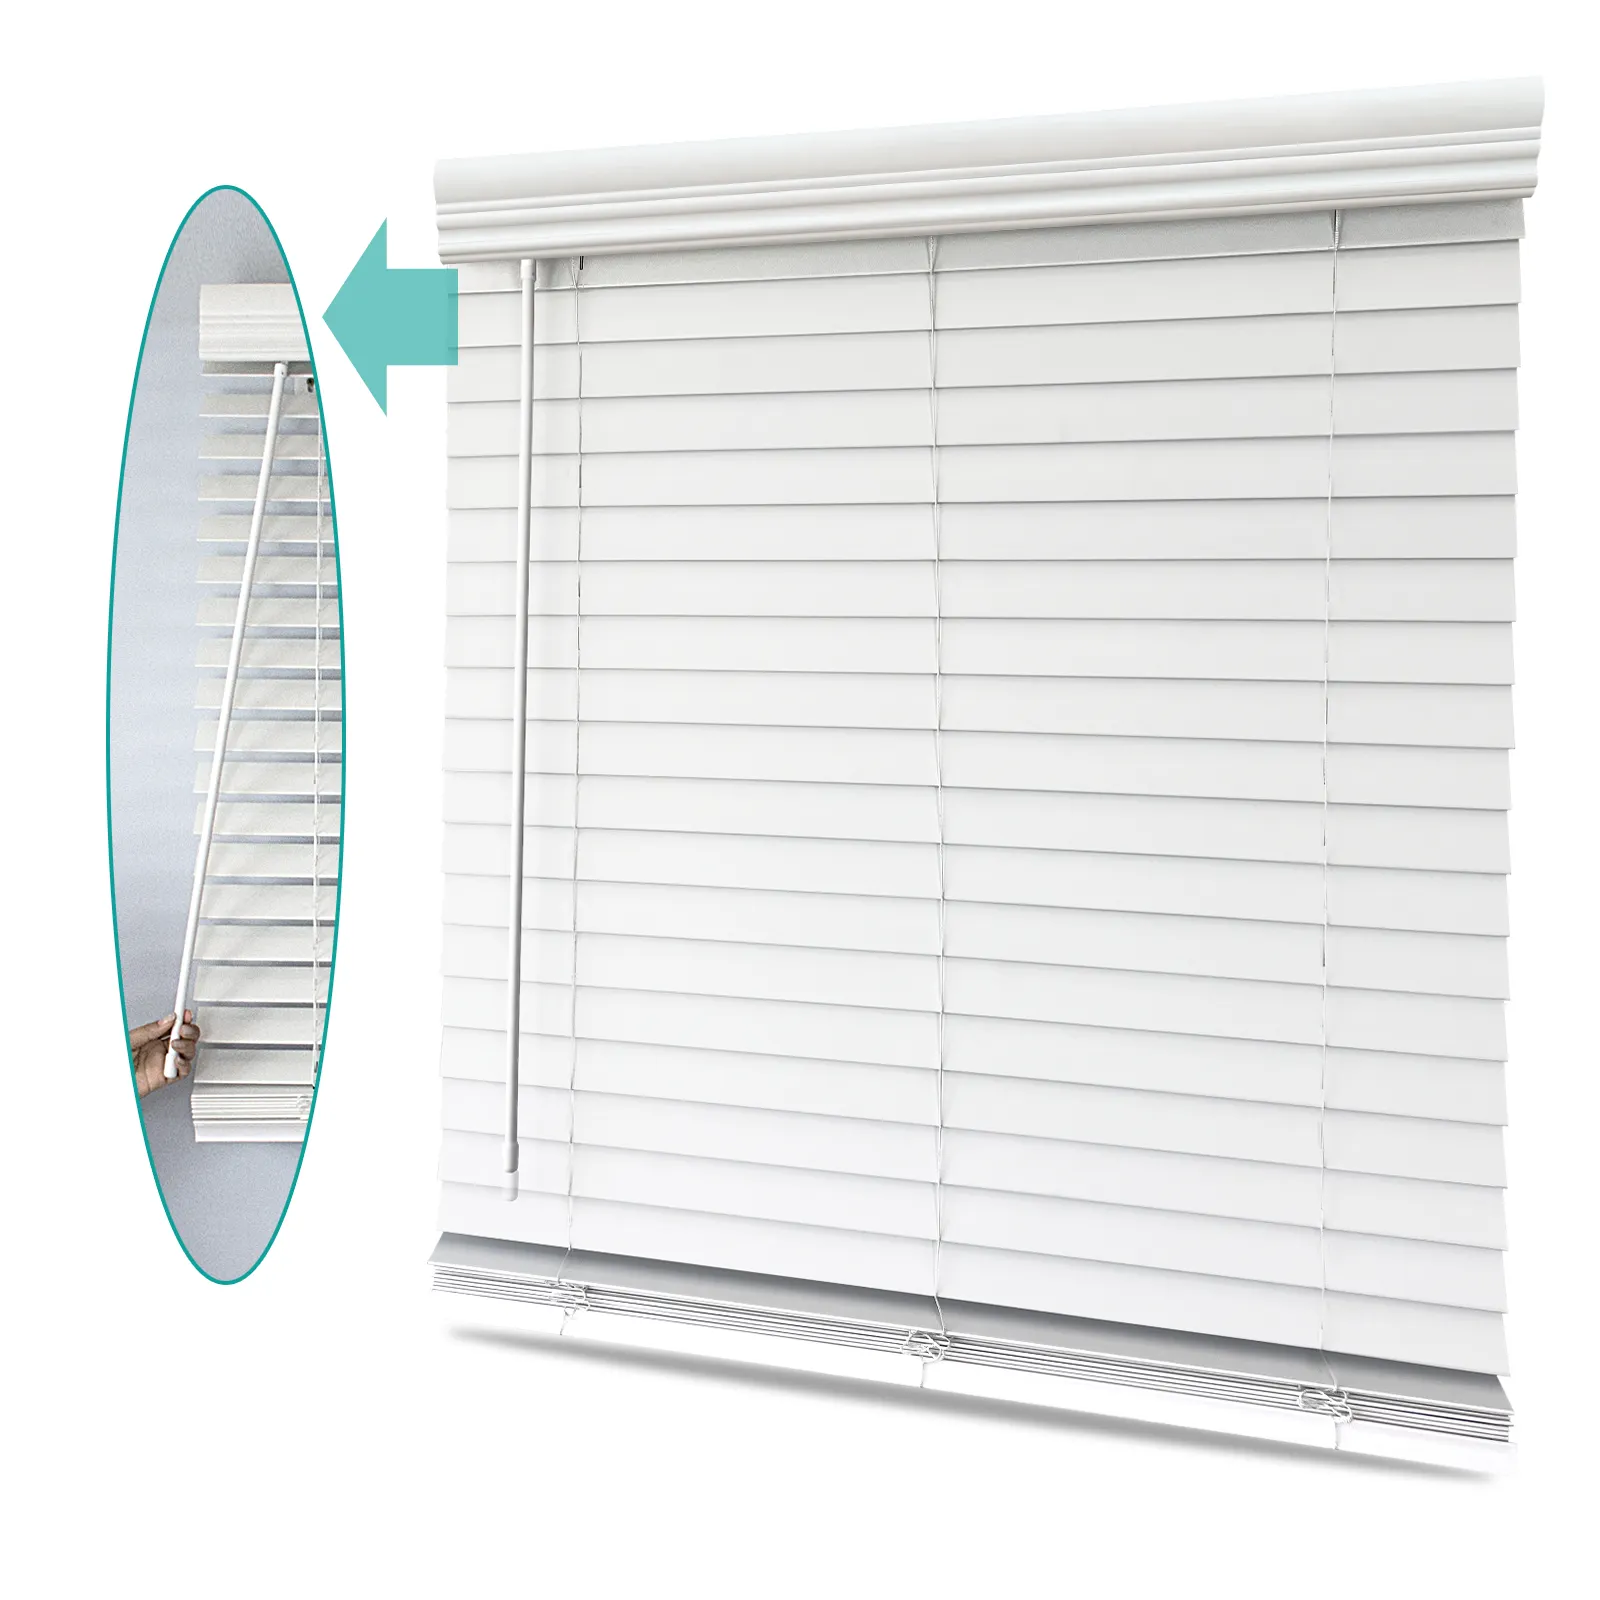 Replacement slats wooden blinds components faux wood window venetian blinds 2 in cordless wood faux blinds